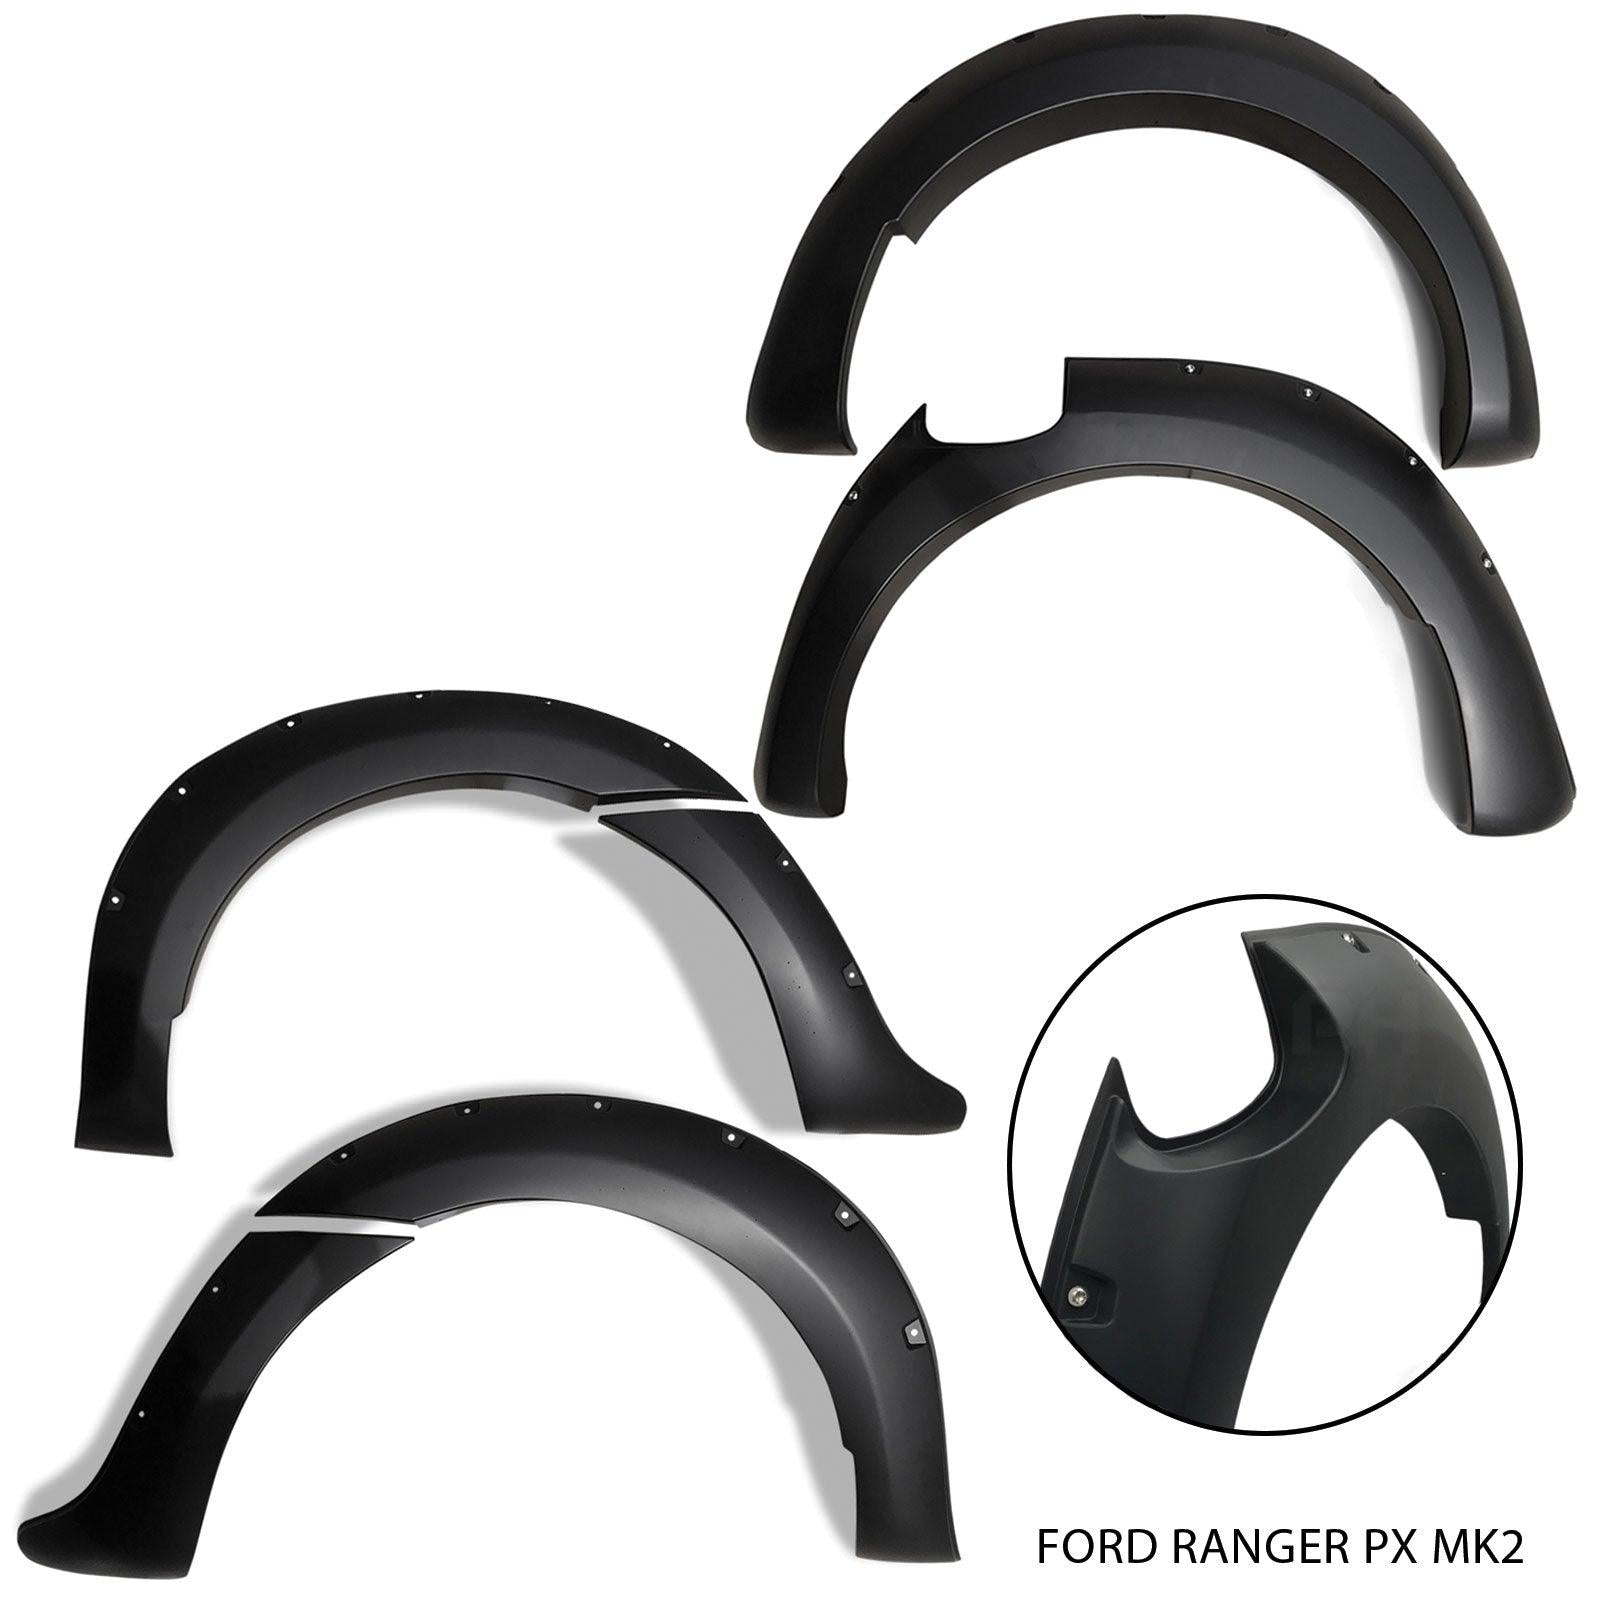 Smooth Wide Bolt On Style Fender Flare Kit 6 Piece Fits Ford Ranger PX MK2 15-18 - 4X4OC™